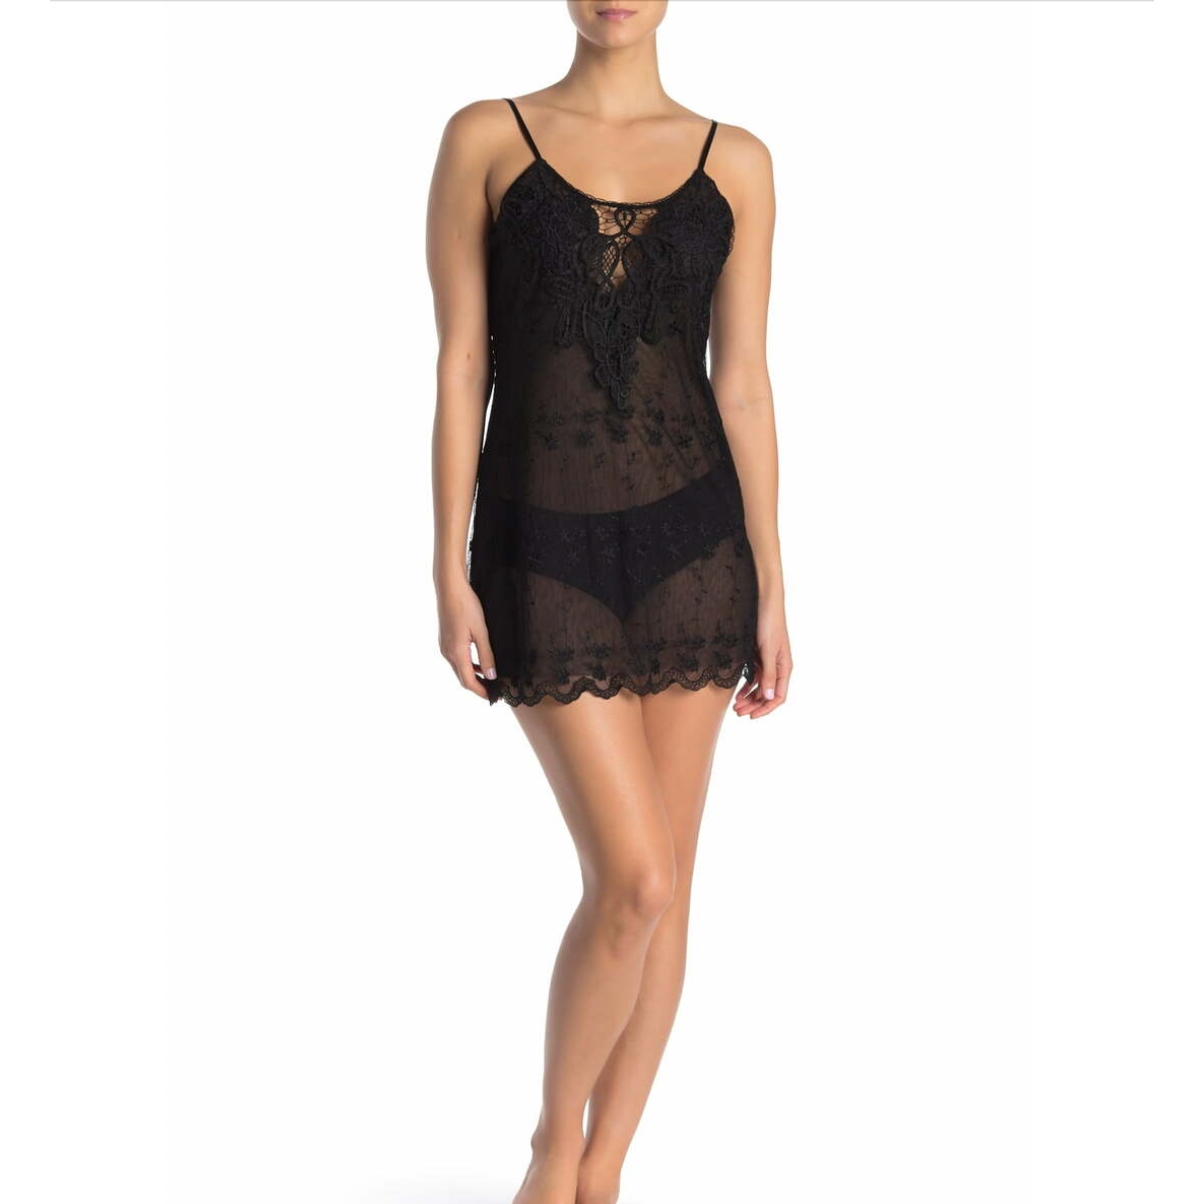 In Bloom by Jonquil Crochet Lace Knit Chemise